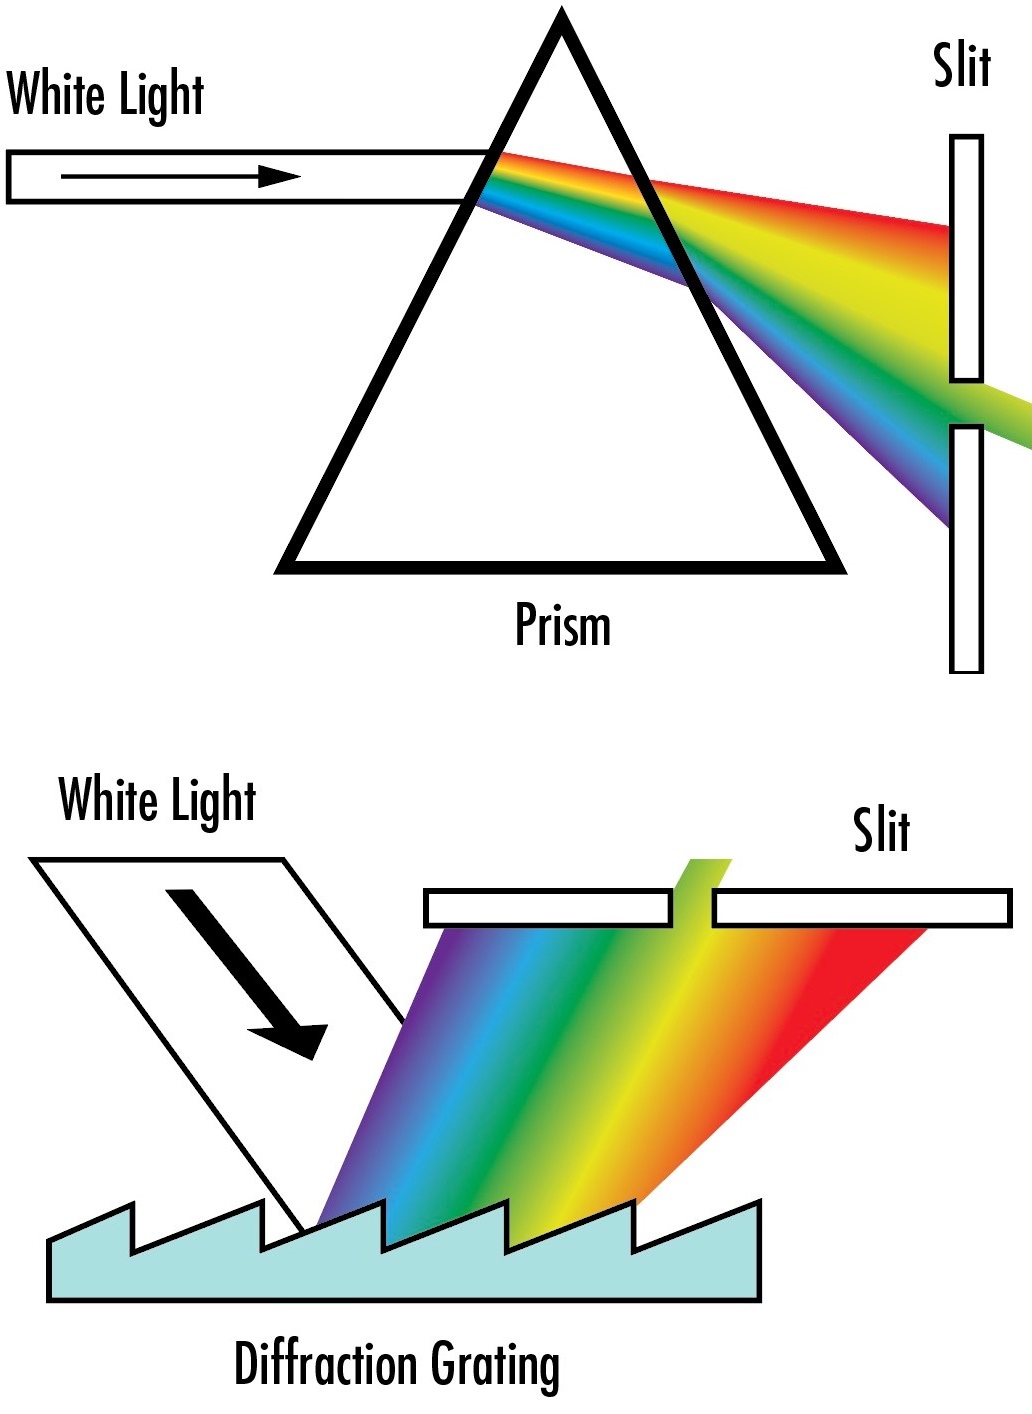 All About Diffraction Gratings | Edmund Optics